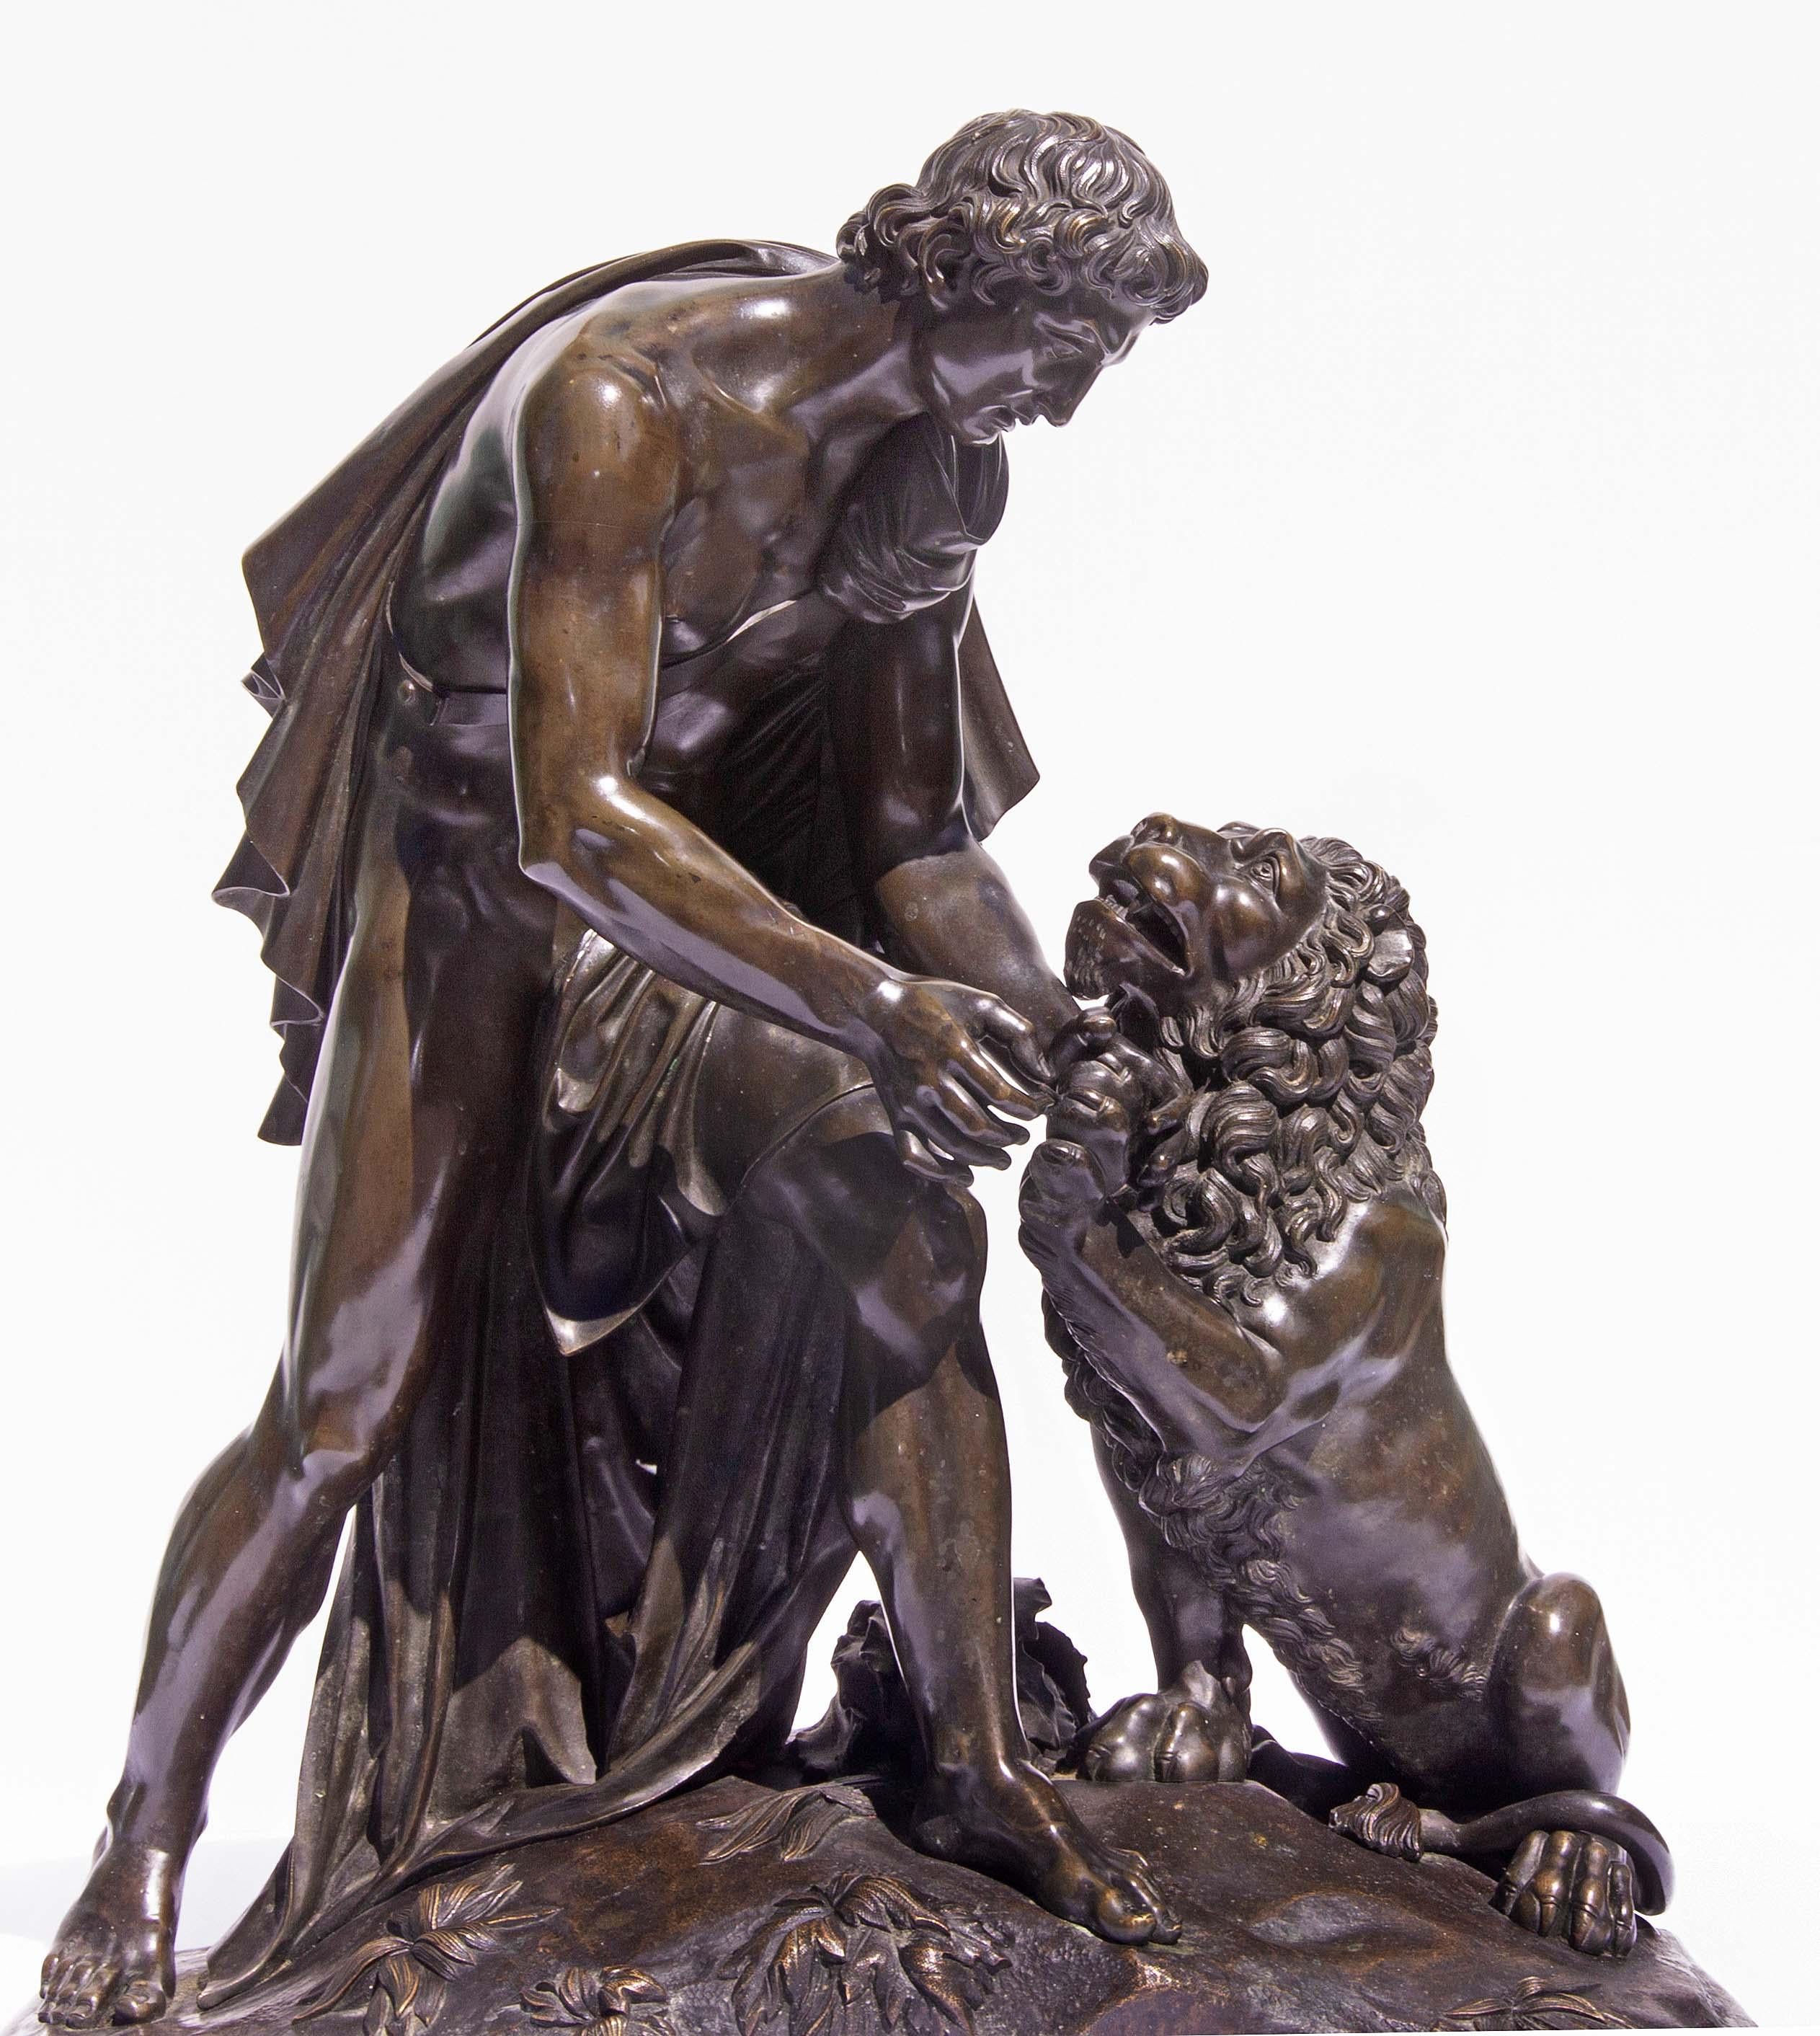 Large French Neoclassical sculpture of Androcles and the Lion. Exceptional quality casting and patina. Mid 19th century.
The runaway slave Androcles became friends with a wounded lion, because he removed a thorn from its paw. When Androcles was